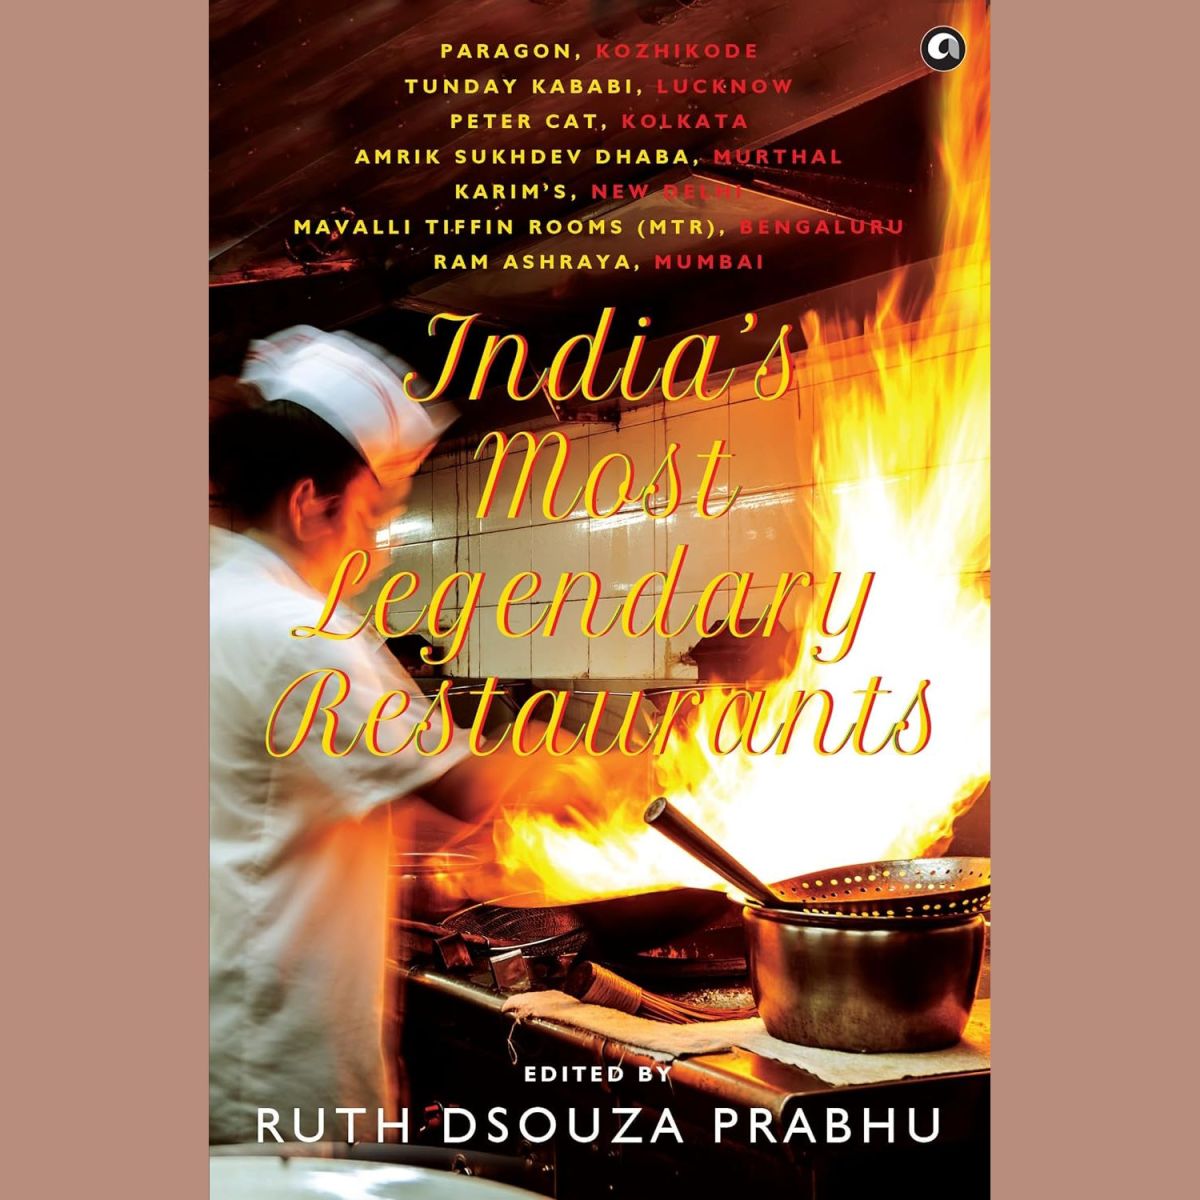 Book Review: India’s Most Legendary Restaurants